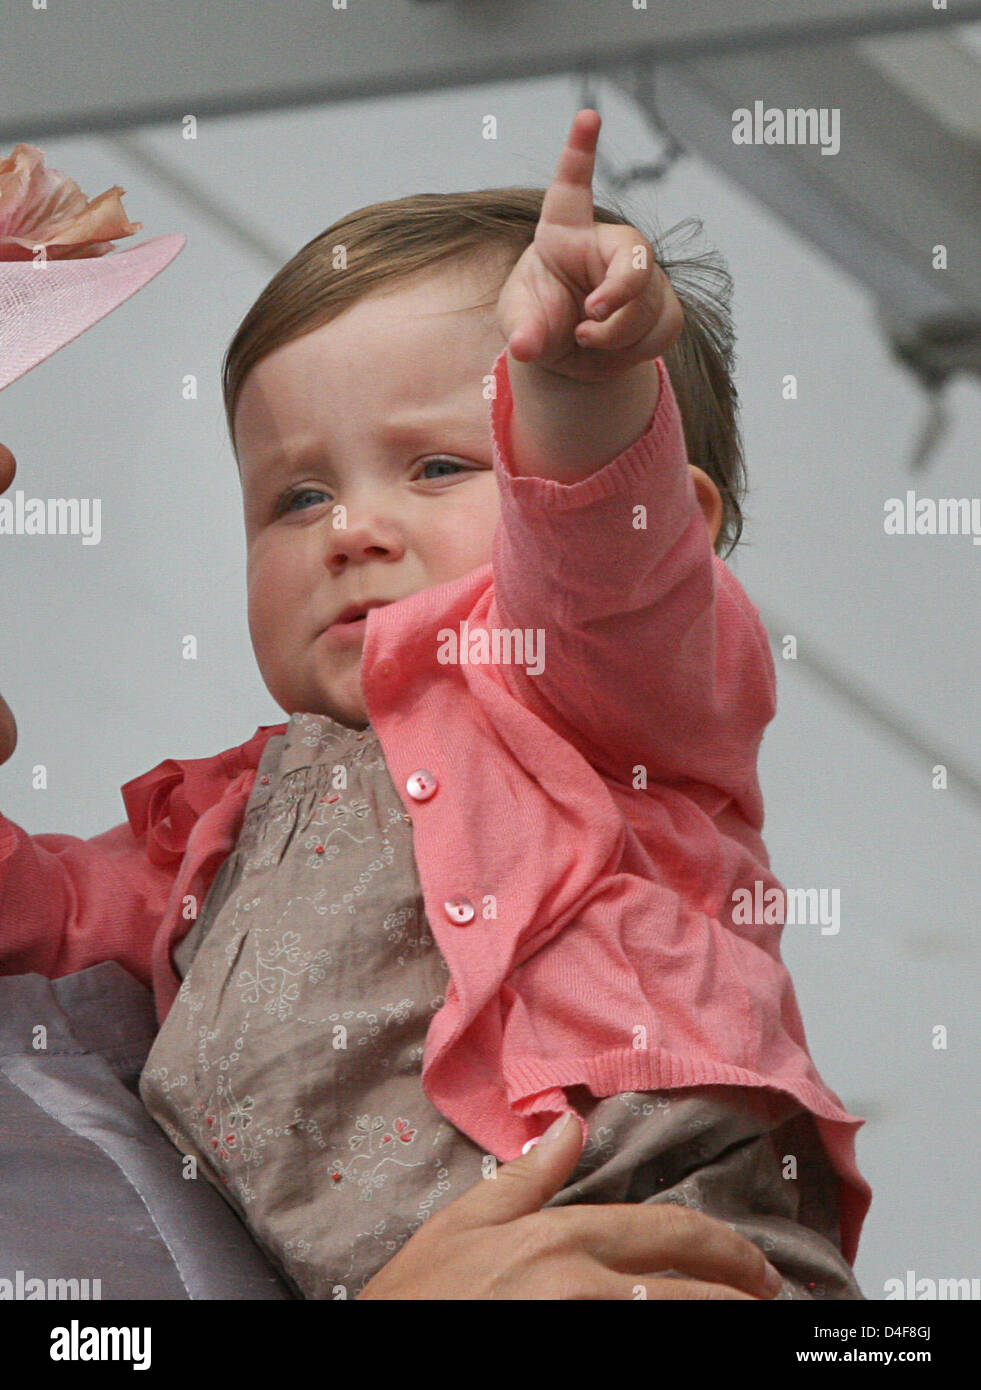 princess-isabella-is-pictured-on-the-second-day-on-royal-yacht-dannebrog-D4F8GJ.jpg